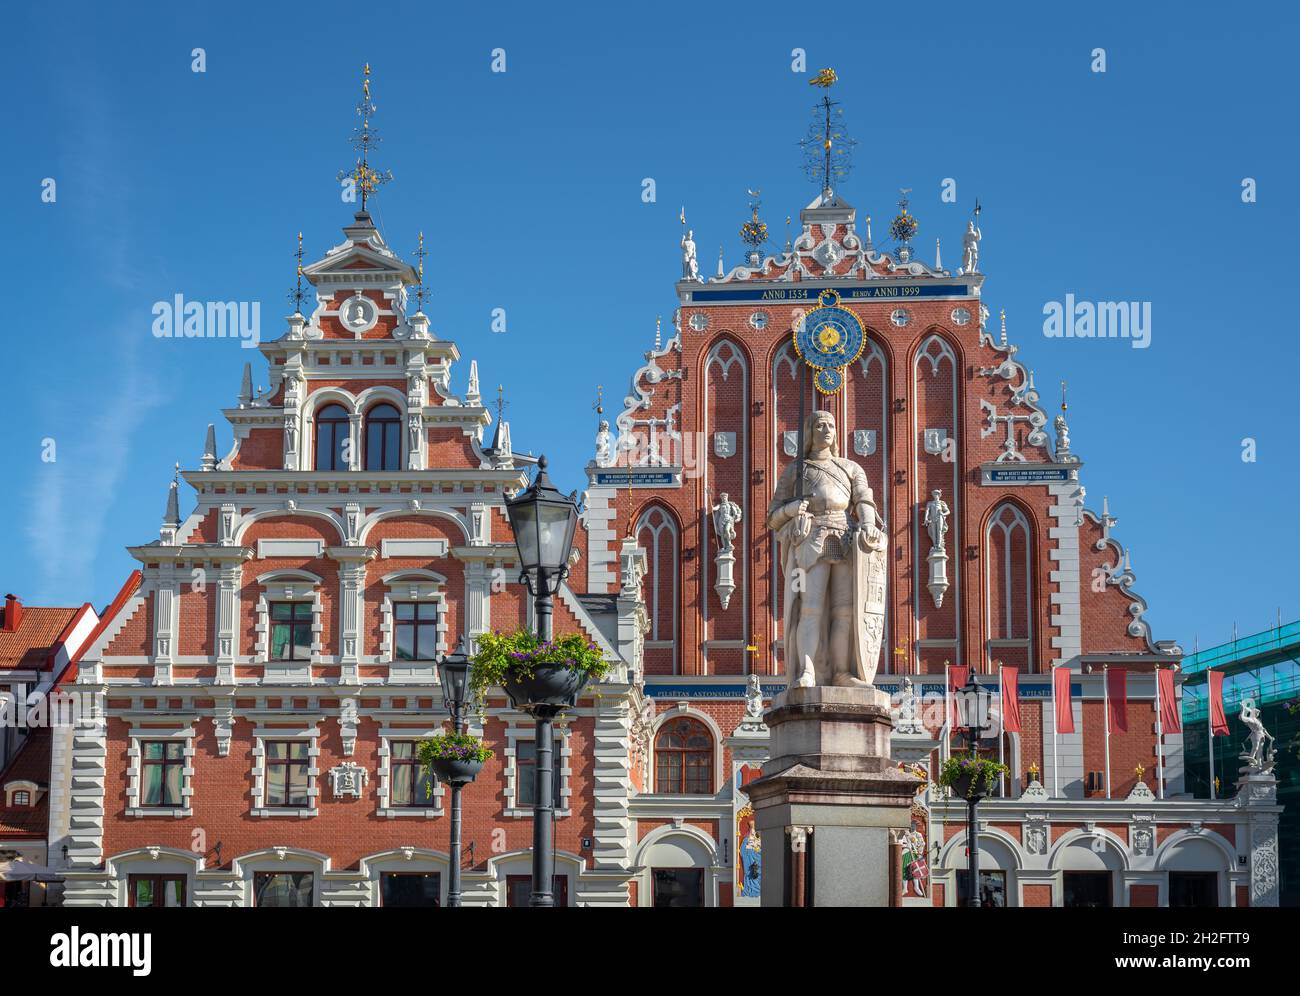 House of the Black Heads and Rolands Statue - Riga, Latvia Stock Photo